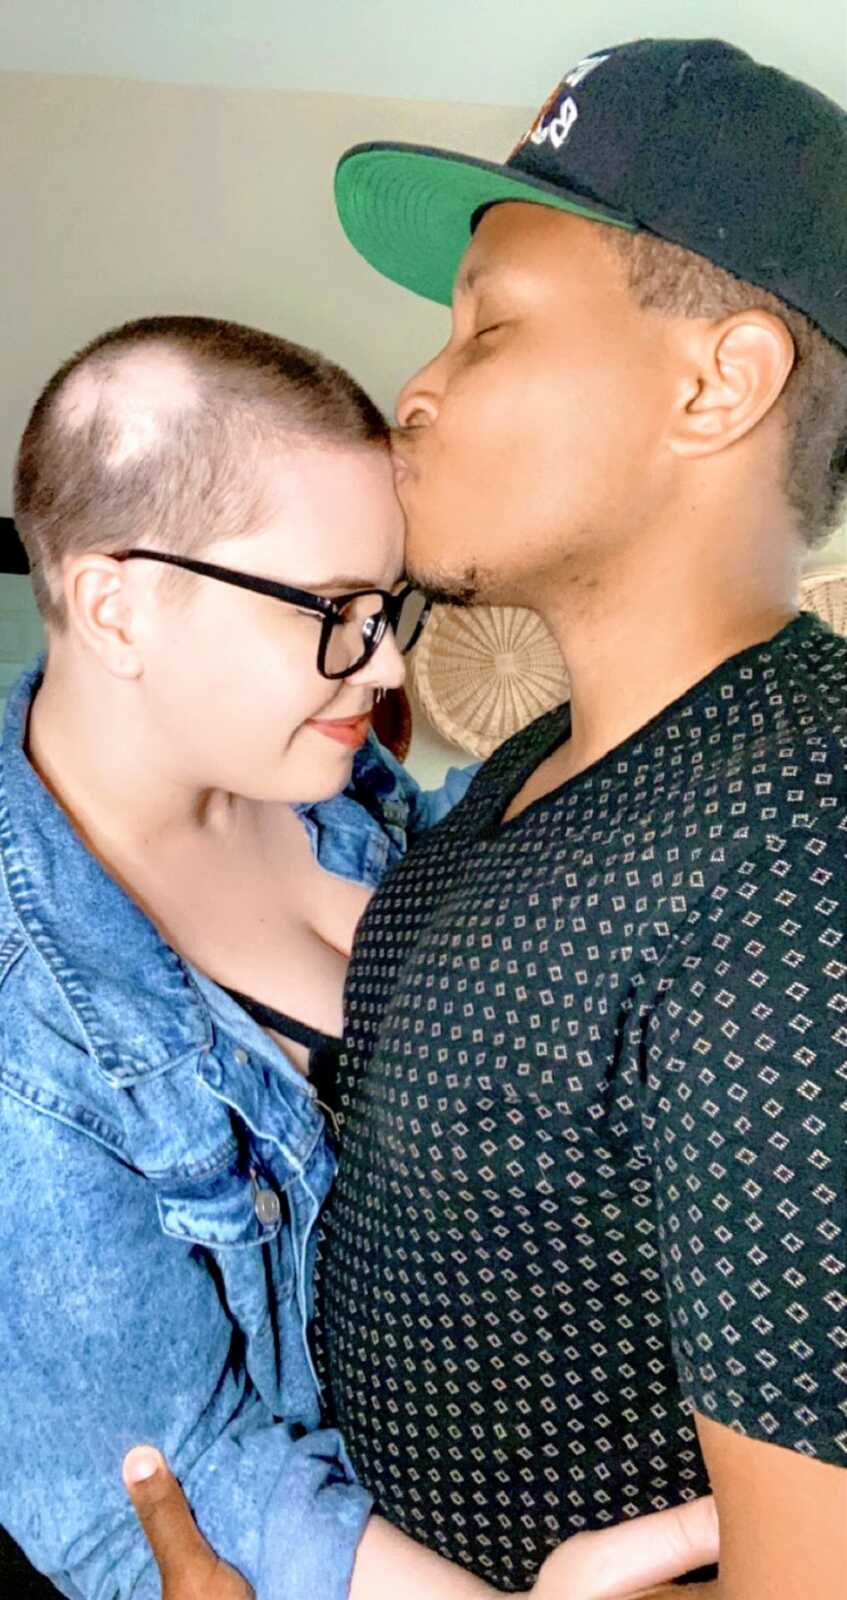 A man kisses his partner with alopecia on the head